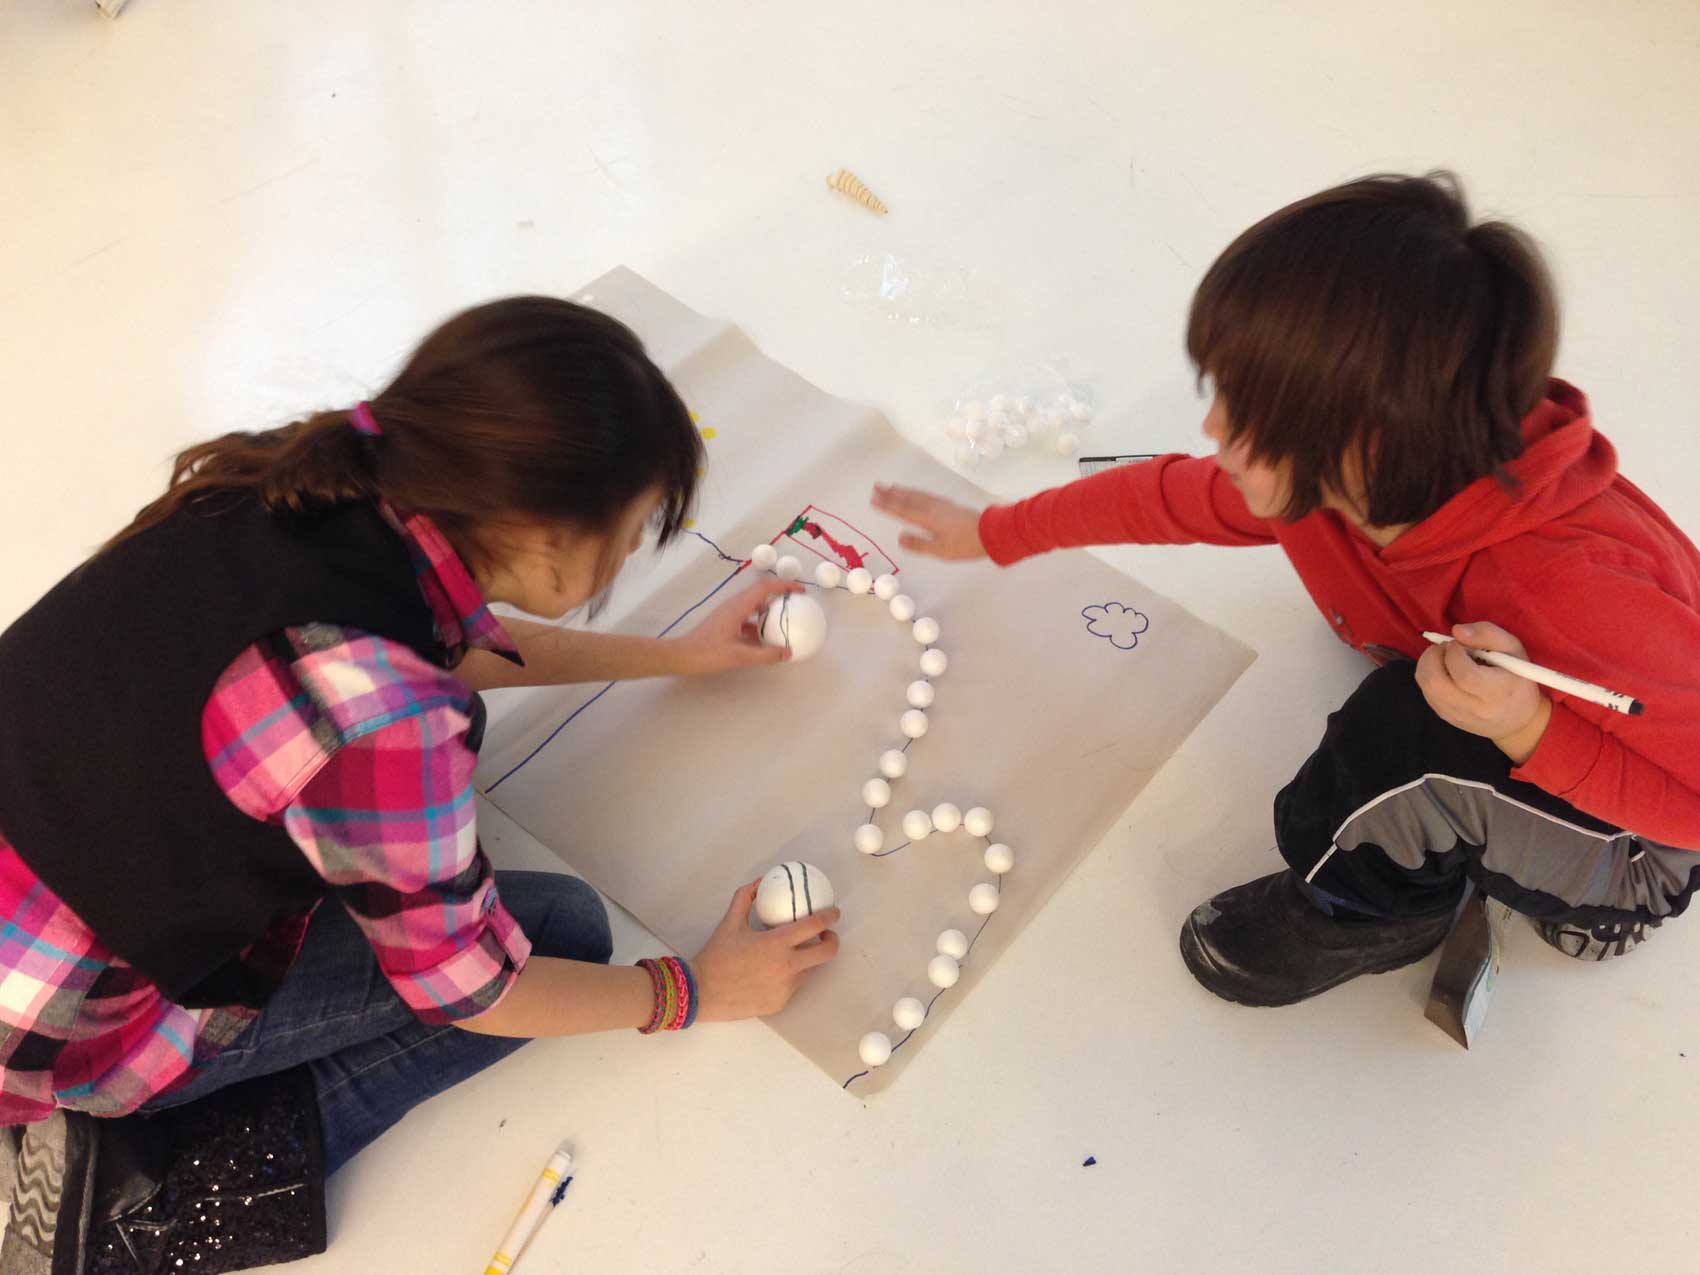 kids create a paper prototype of a game